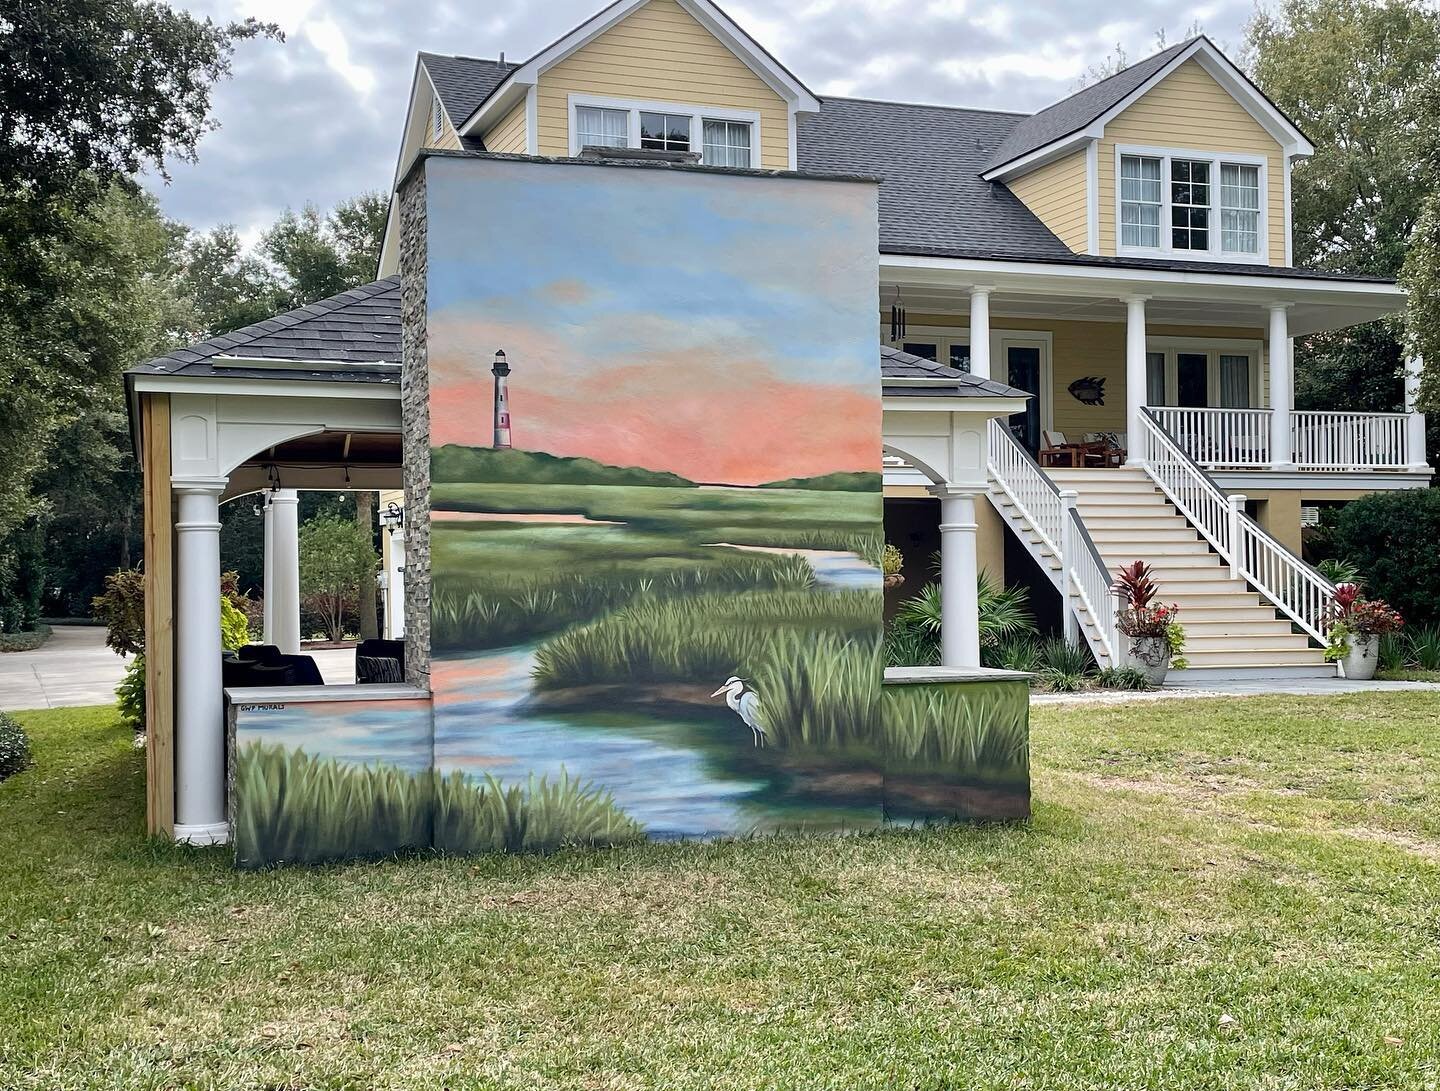 Here&rsquo;s a marsh mural we finished up for a residence on James Island! This mural is located on the back of an outdoor fireplace &amp; living area that faces the marsh. The client was looking for something that fit the natural landscape of their 